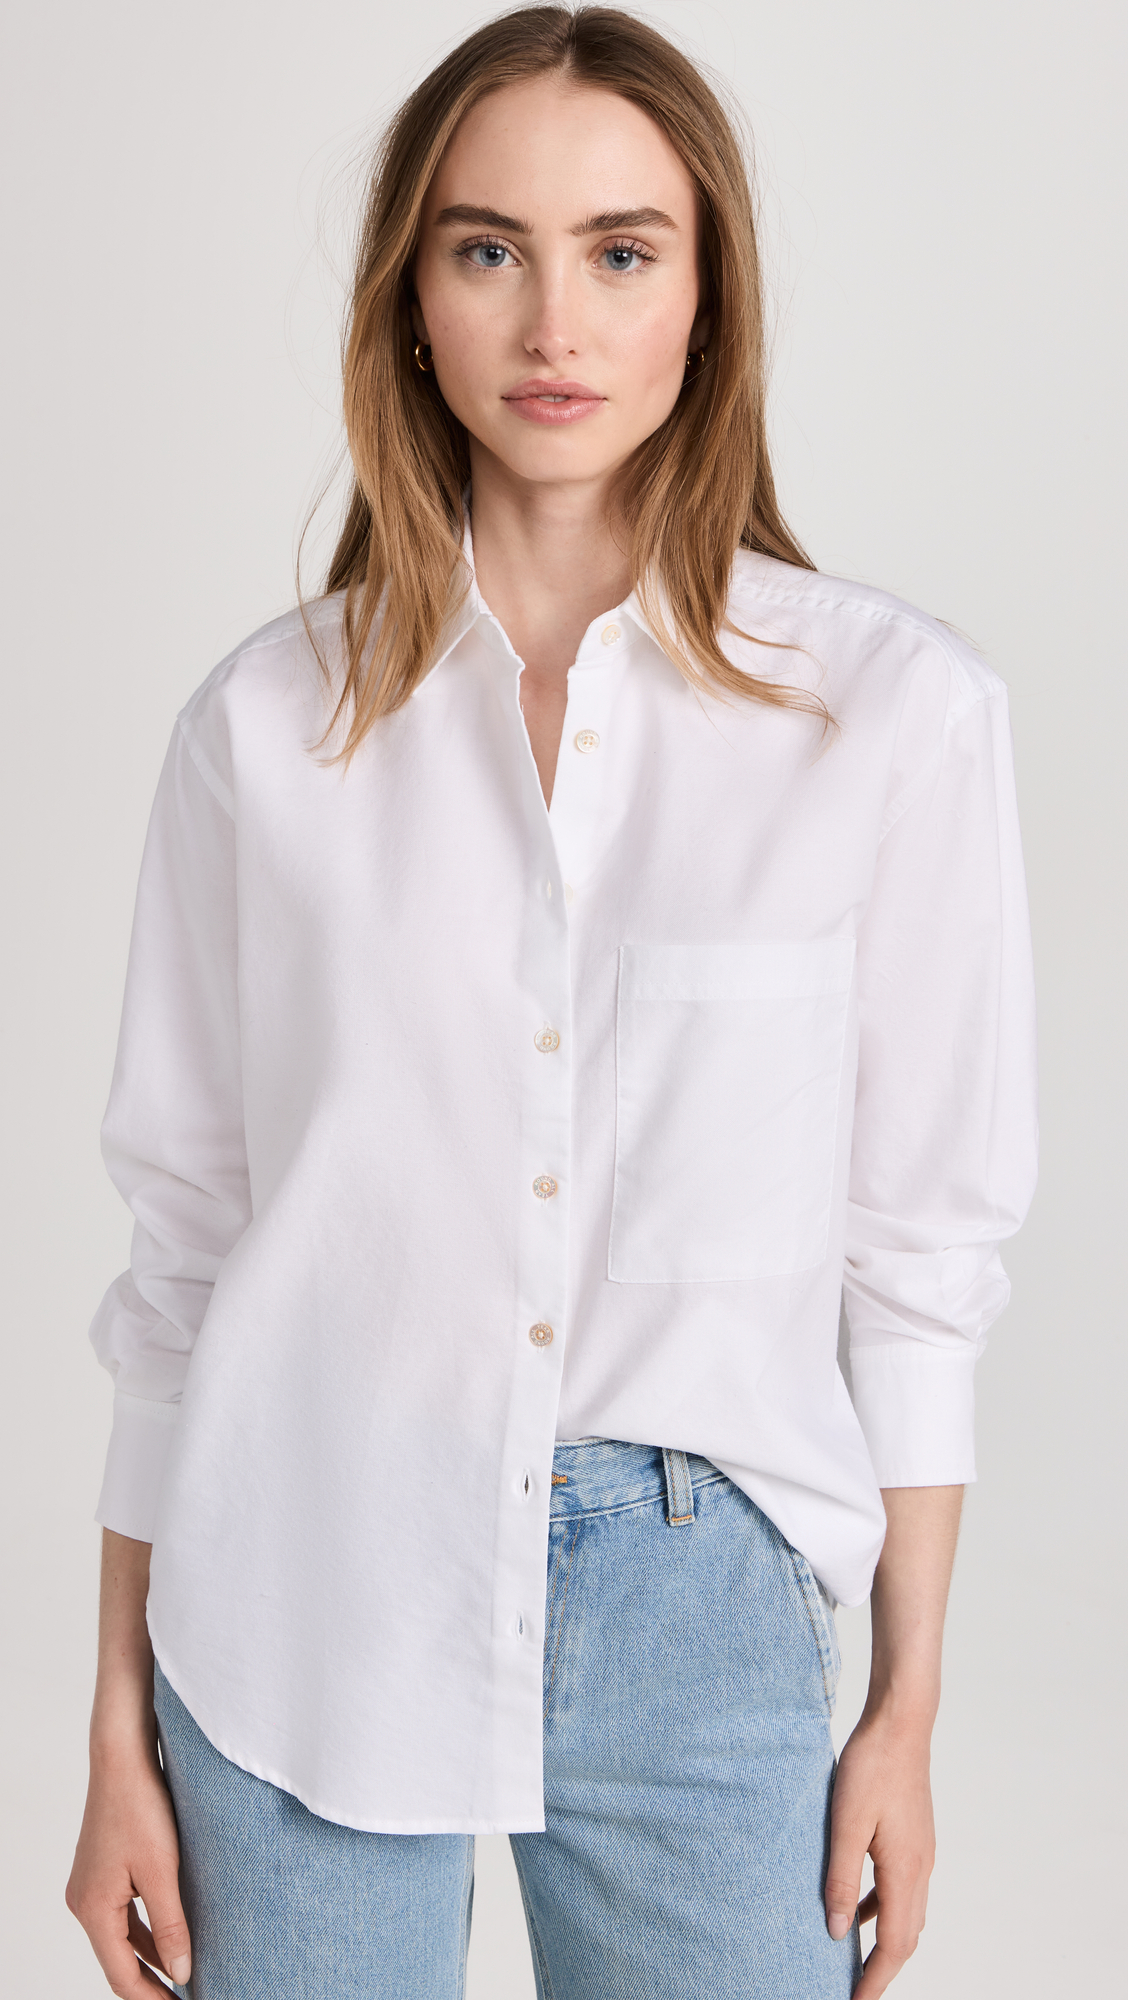 The 7 Spring Basics That Are Exceptionally Trendy This Year | Who What Wear